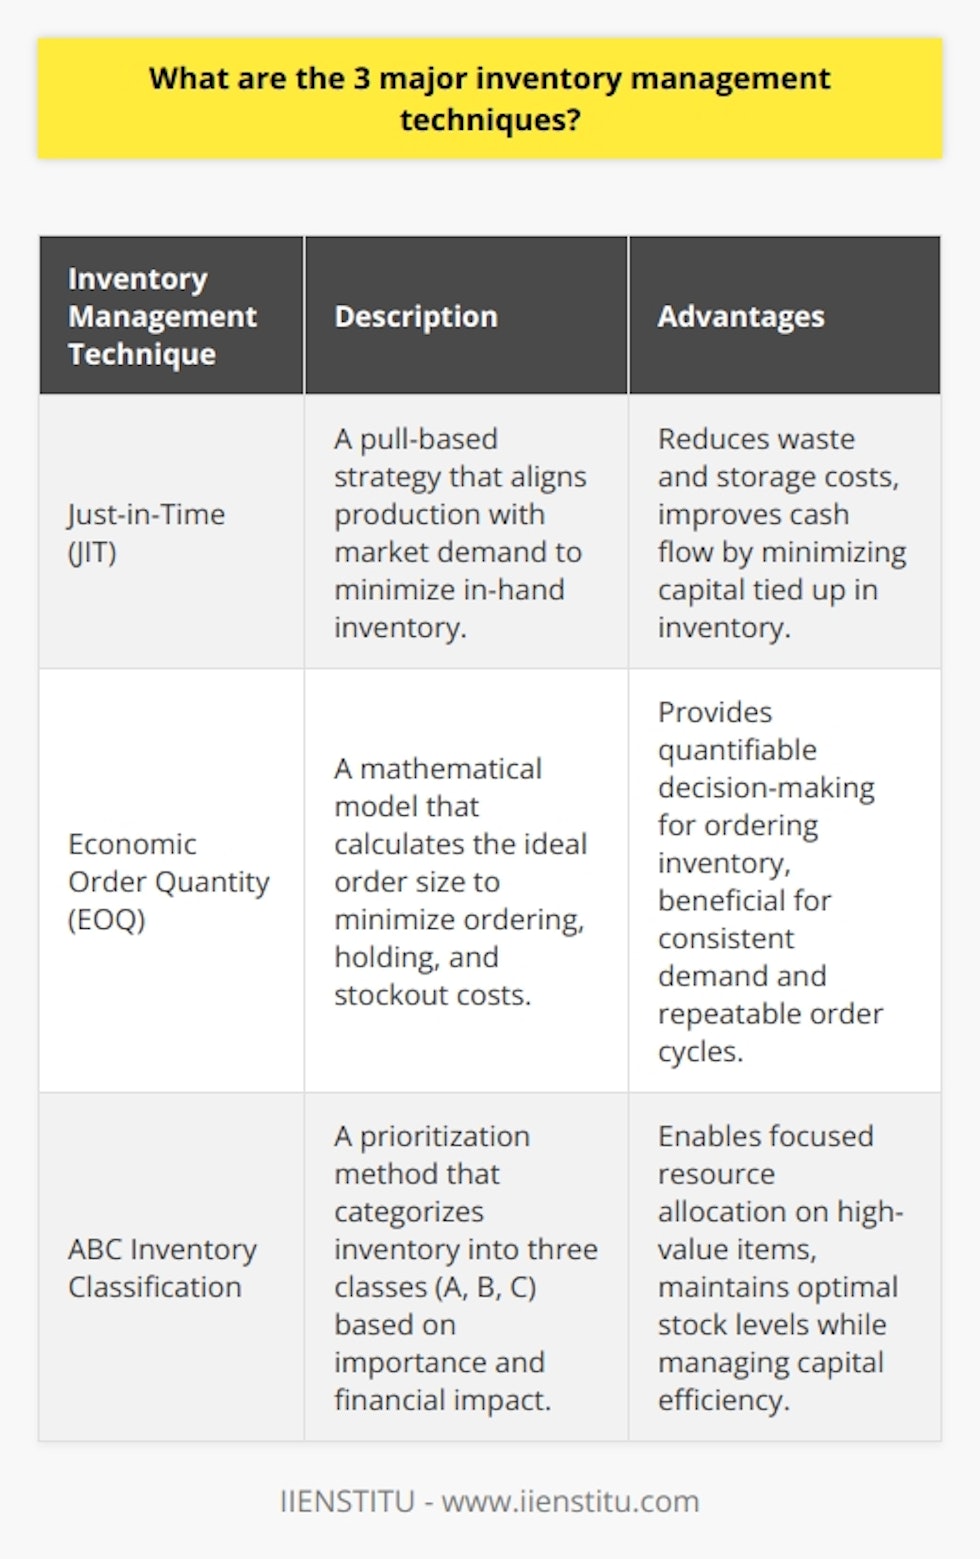 Inventory management is a critical aspect of operation for businesses across various industries, as it governs the optimization of stock levels, ensures operational efficiency, and improves customer satisfaction. Three major techniques in inventory management that enable businesses to effectively monitor and control inventory are the Just-in-Time (JIT) inventory method, the Economic Order Quantity (EOQ) model, and the ABC Inventory Classification system.Just-in-Time Inventory Method:The JIT inventory method is a pull-based strategy that strives to minimize in-hand inventory by syncing production schedules closely with market demand. Operating on a demand-driven basis, this method allows businesses to reduce waste and inefficiencies associated with overproduction and storage costs. At the heart of JIT is the philosophy that companies should maintain inventory levels just enough to meet immediate production needs without surplus. This ultimately helps in reducing the amount of capital tied up in inventory, thus enhancing cash flow.Economic Order Quantity (EOQ) Model:EOQ is a mathematical model that determines the ideal order size that will minimize the costs associated with buying, producing, and holding inventory. The formula takes into account the ordering costs (costs incurred every time an order is placed, regardless of the order size), holding costs (costs to store and manage inventory), and the stockout costs to calculate the most economical quantity to order. The EOQ model provides a quantifiable approach to determining how much inventory is needed while balancing associated costs, making it especially valuable for businesses with consistent demand and repeatable order cycles.ABC Inventory Classification System:The ABC inventory classification system is a prioritization technique that segments inventory into three categories (A, B, and C) based on the importance and financial impact of the items. Category A represents the most valuable items that contribute significantly to the overall profit but are typically the smallest percentage of the inventory. Category C includes lower-cost, high-volume items that contribute the least to profit. Category B sits in the middle, representing items of moderate value and turnover rate. By using this method, businesses can prioritize their focus and resources on the most critical items, ensuring that high-value products have optimal stock levels and that capital is not unnecessarily tied up in less critical items.Integrating these techniques into an effective inventory management strategy can substantially enhance a company's ability to respond to market conditions, reduce operational costs, and maximize profitability. While each method offers distinct advantages, they can be complementary when employed in unison, tailored to the unique needs and dynamics of the business.